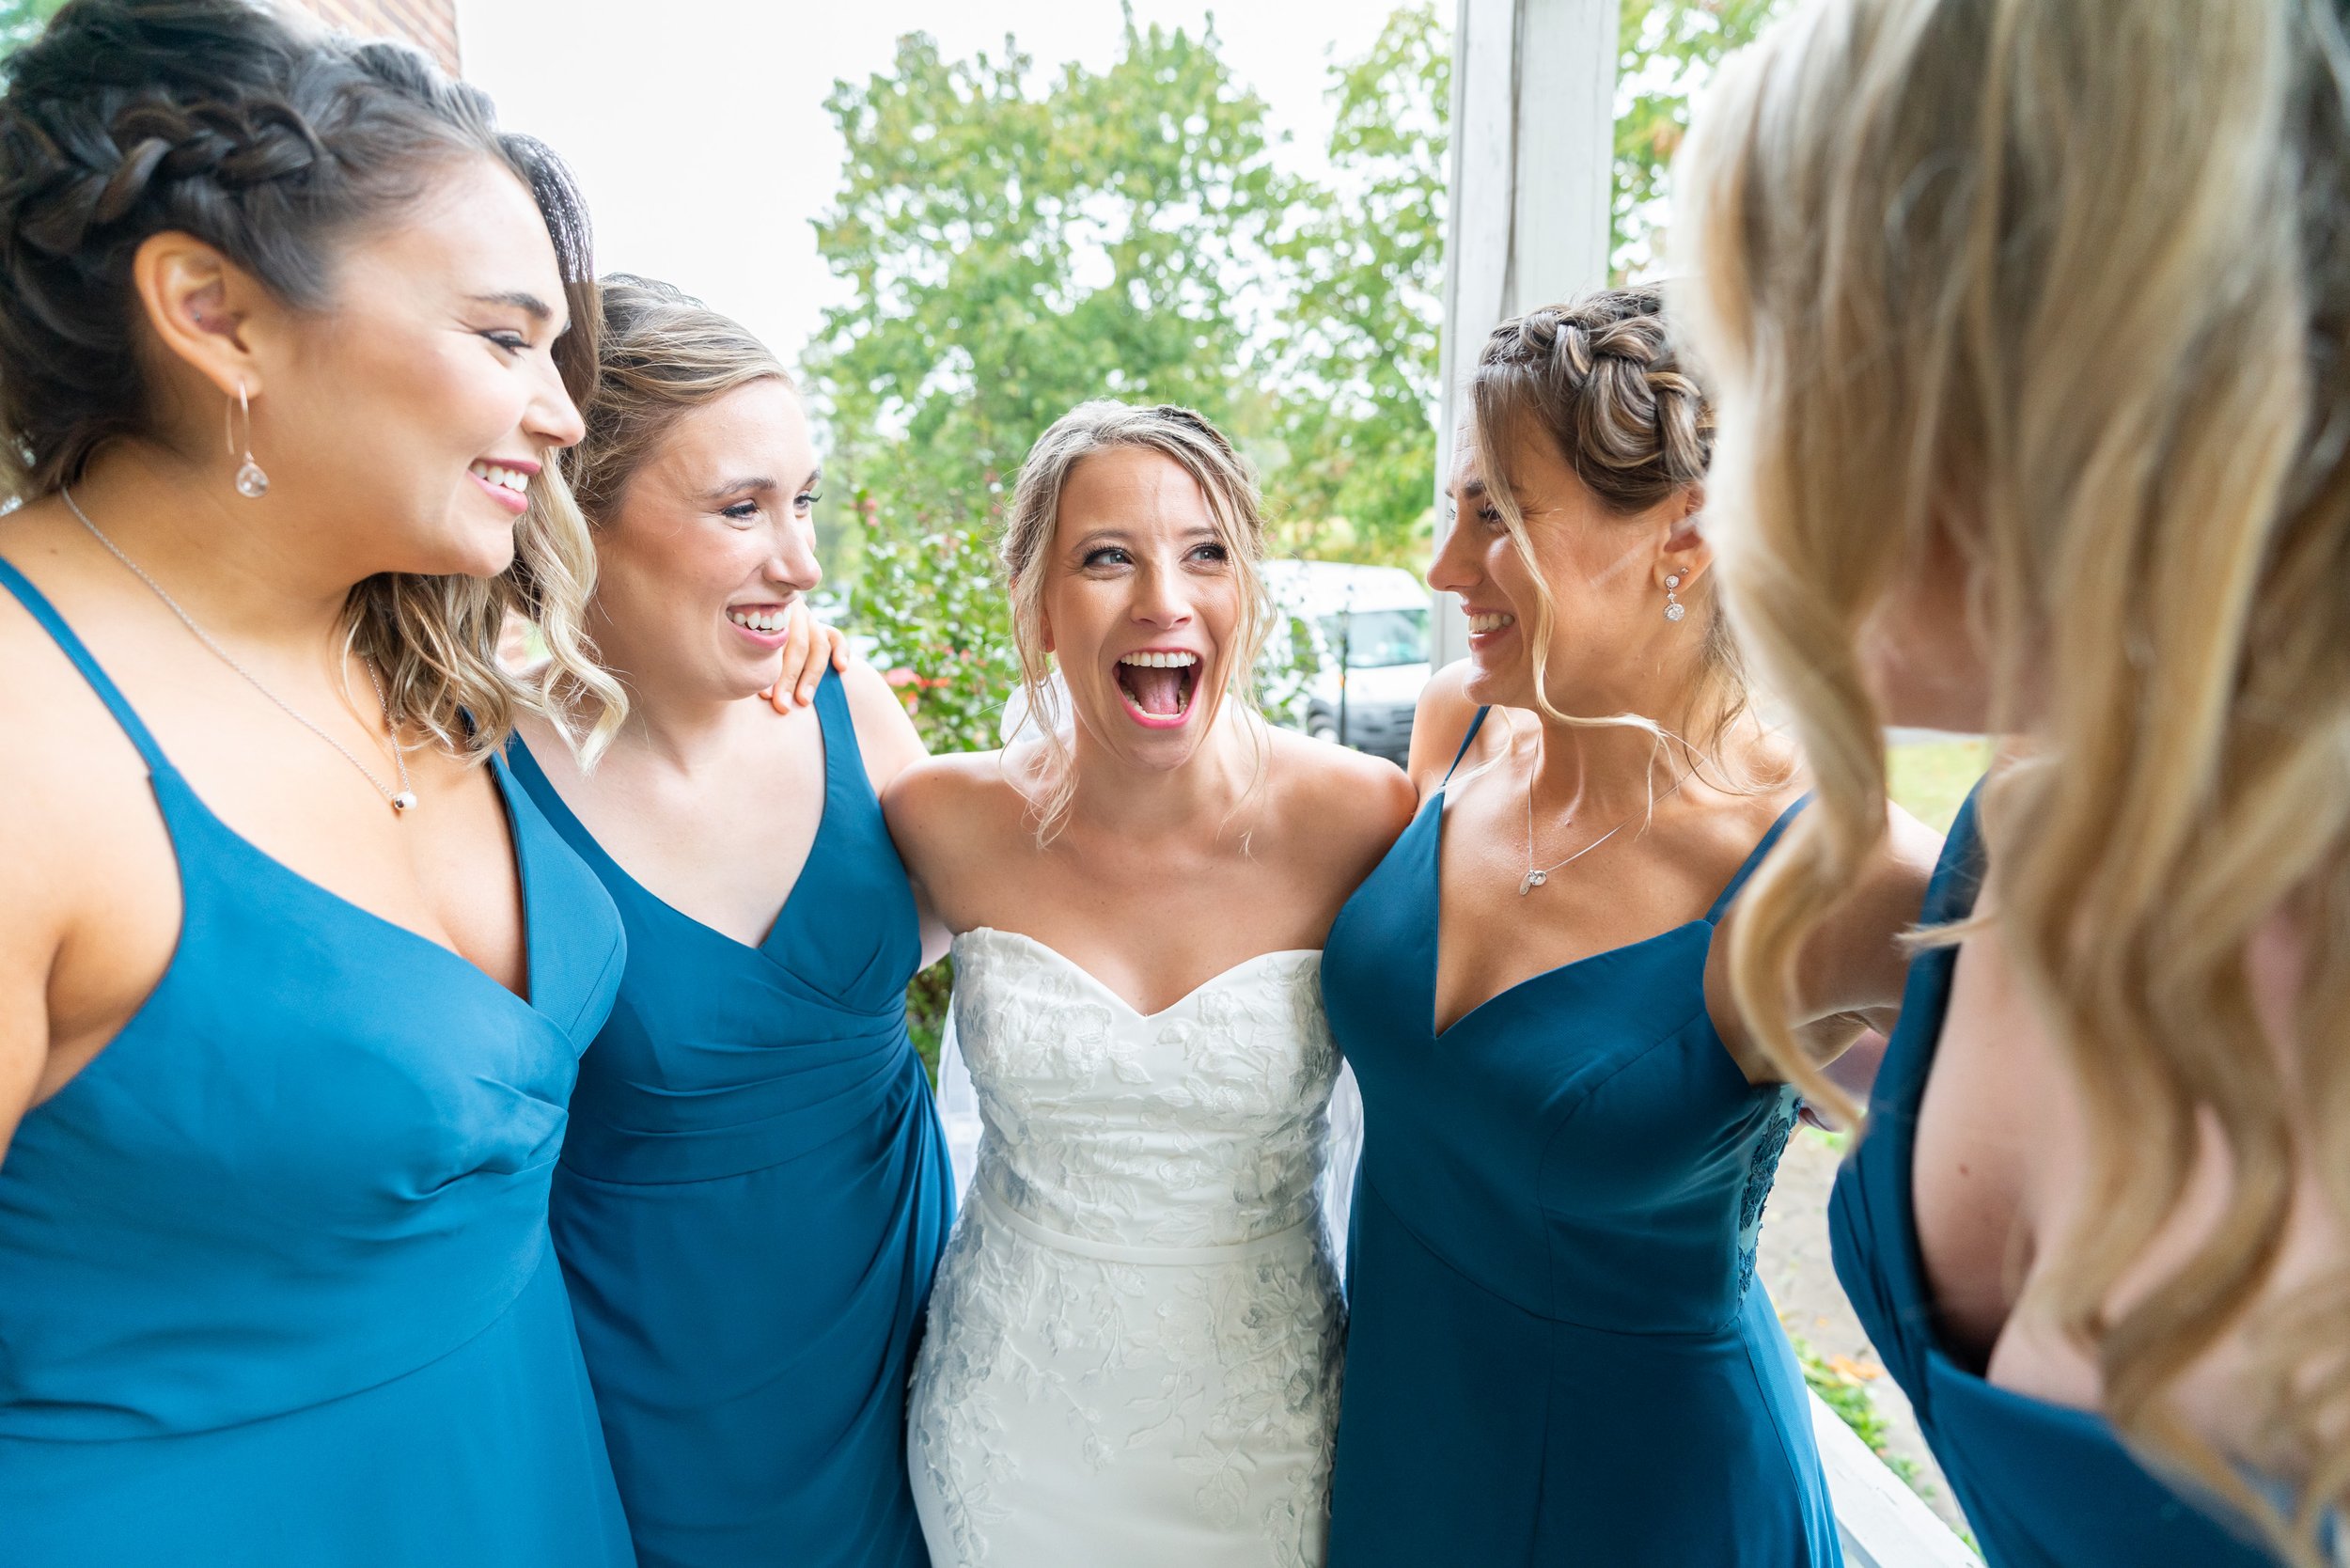 Bride laughing with bridesmaids in dark teal gowns from Amaze